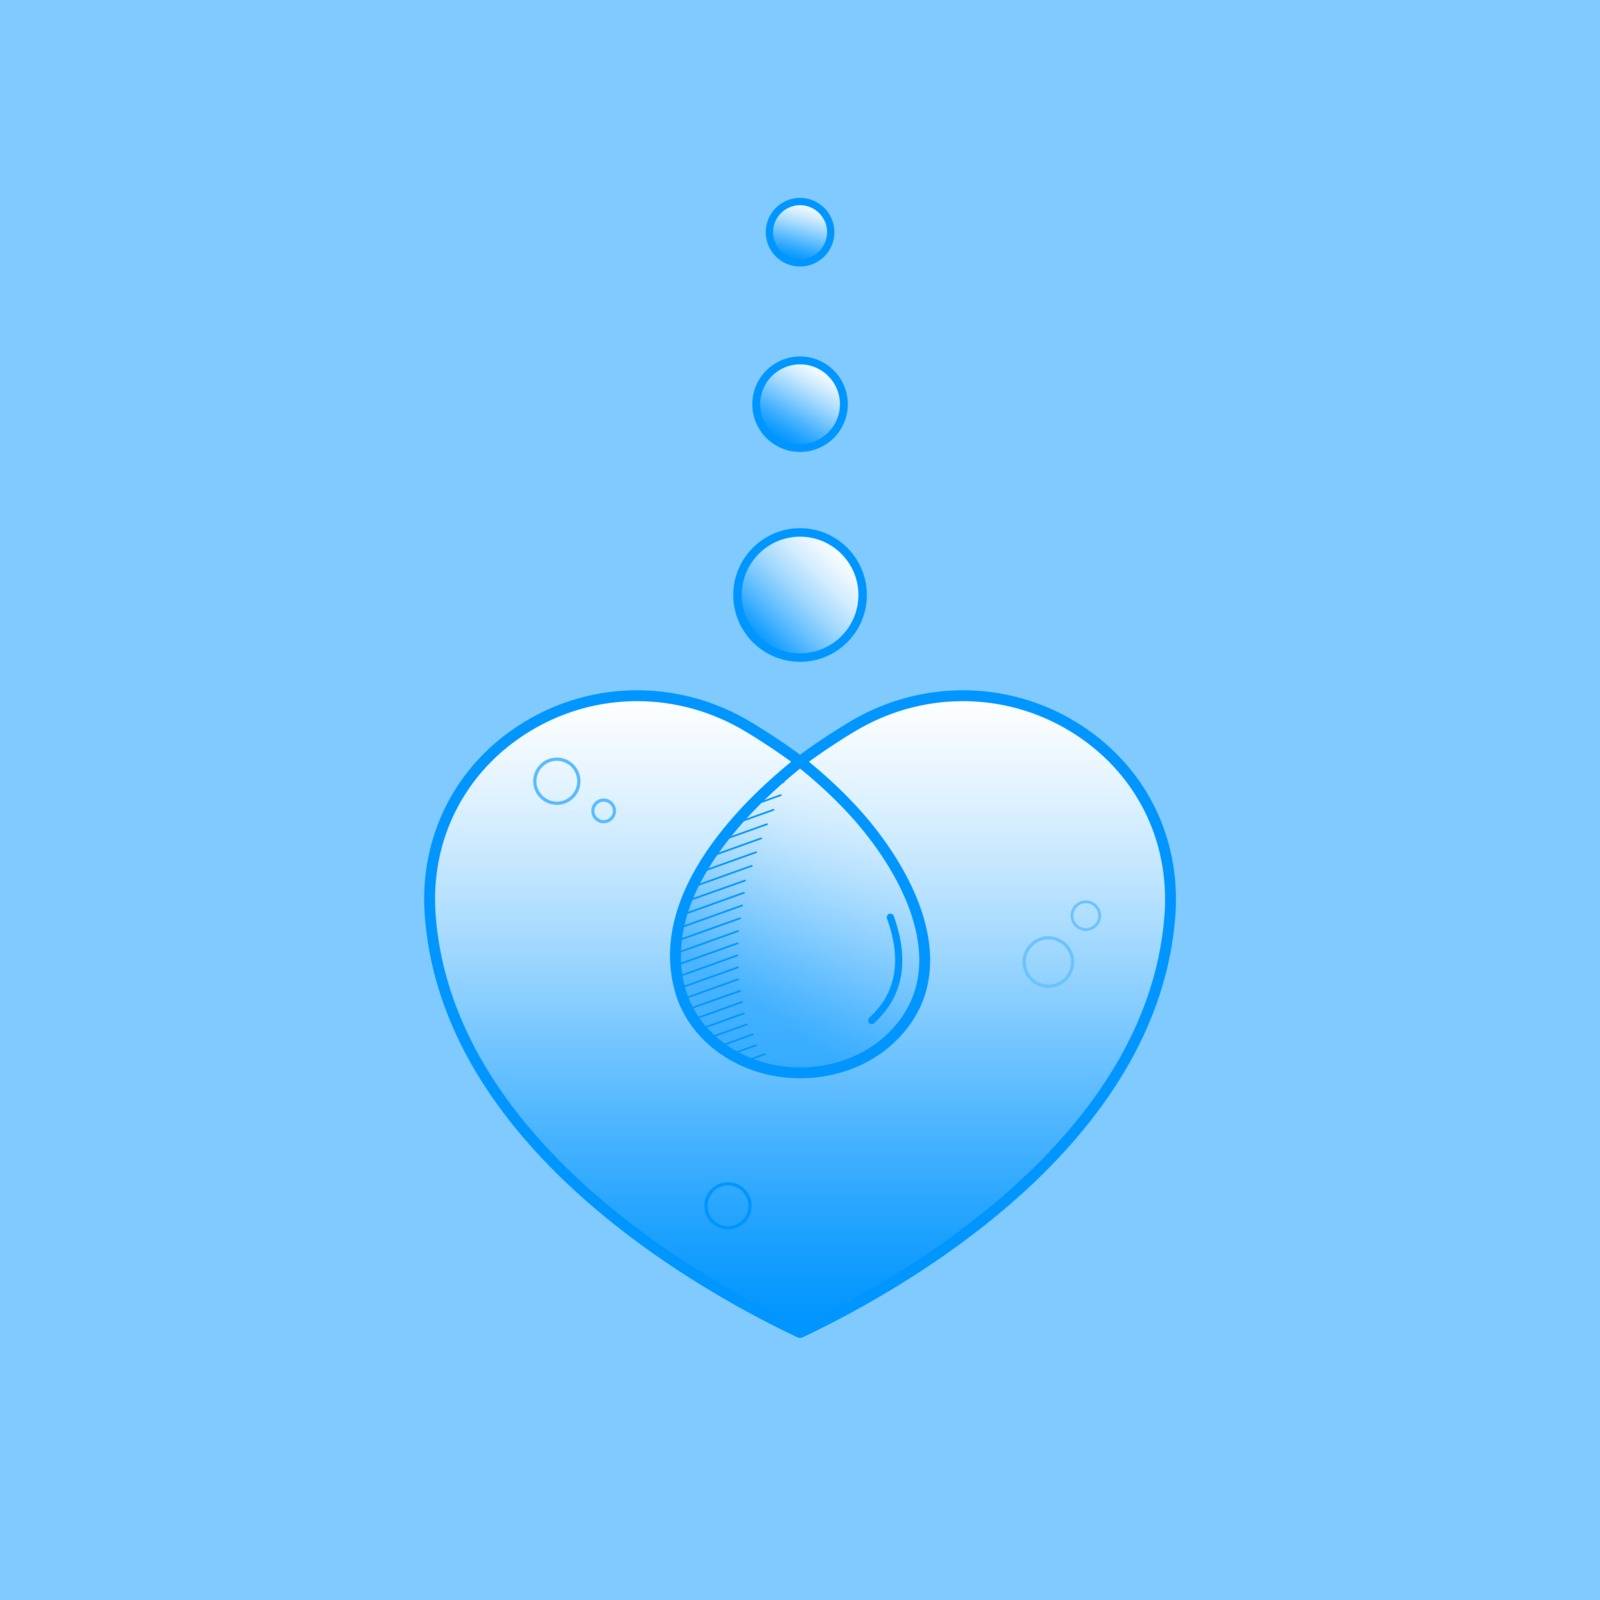 Water drop heart. Importance of water. Value of water. Vector illustration outline flat design style.